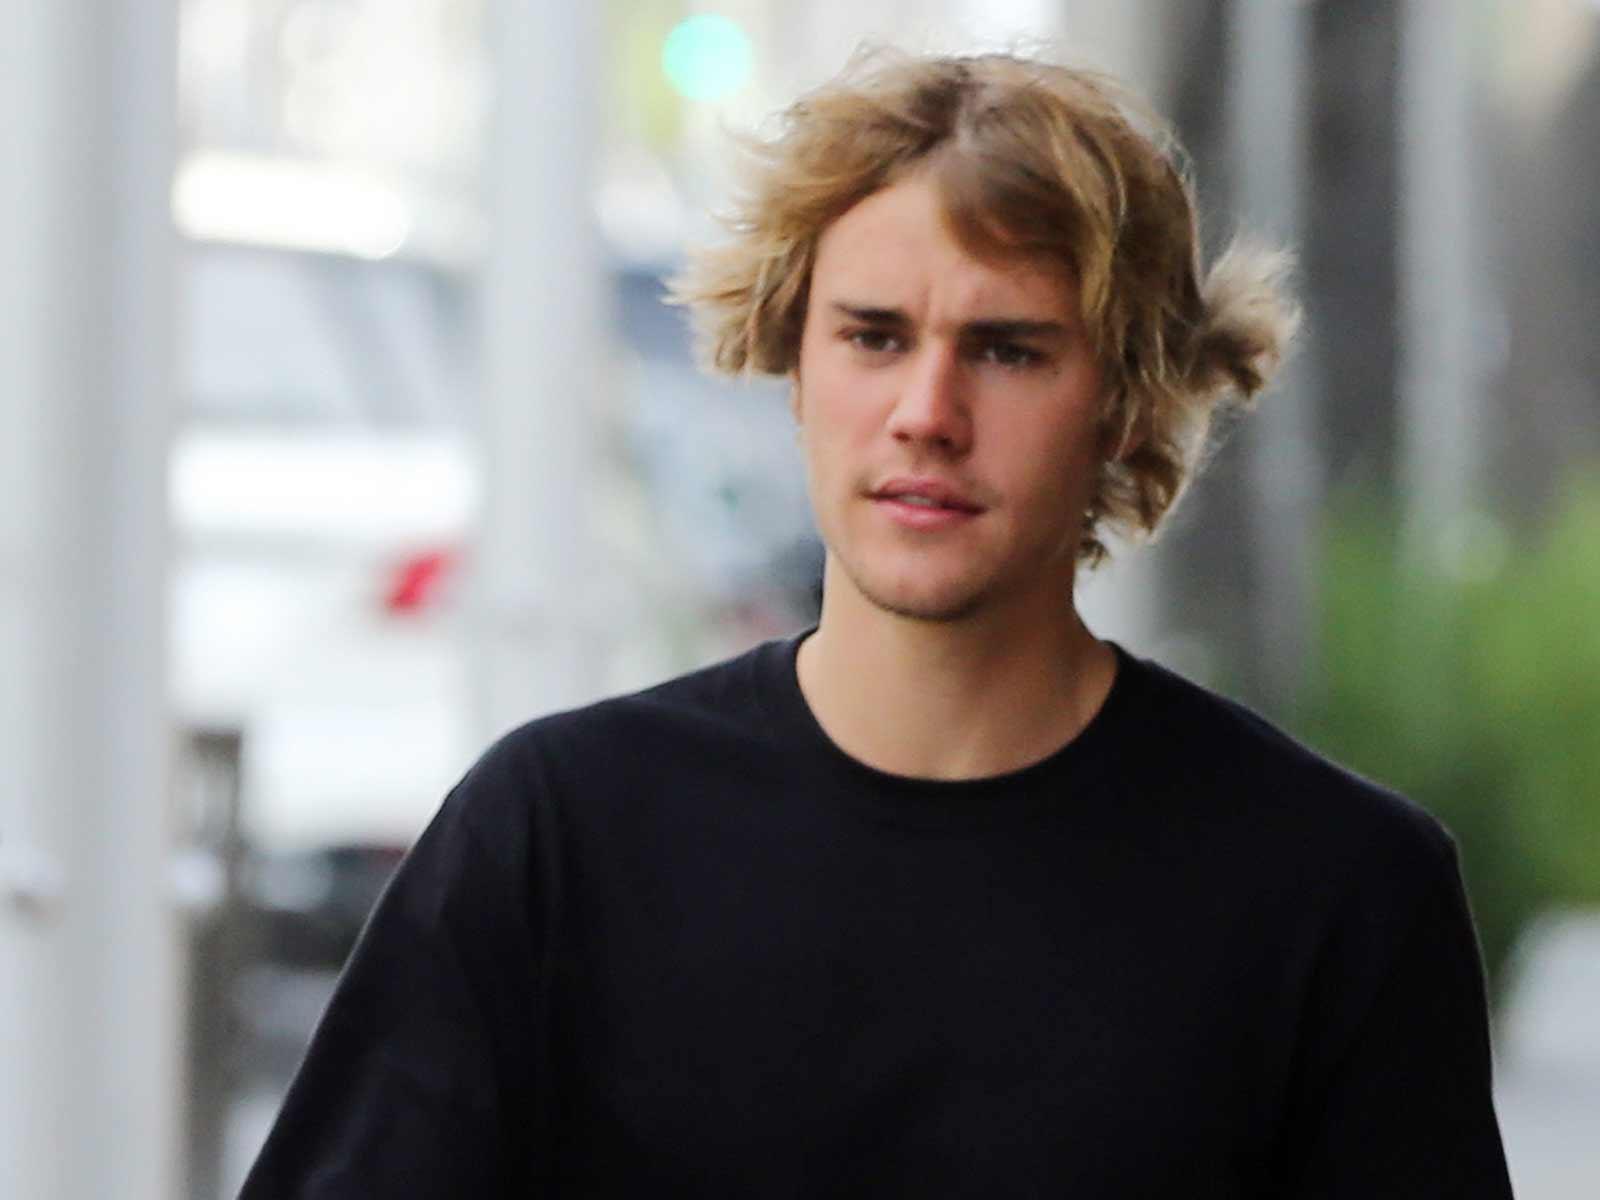 Justin Bieber Accused of Using ‘Racial Epithets’ During Cleveland Street Brawl